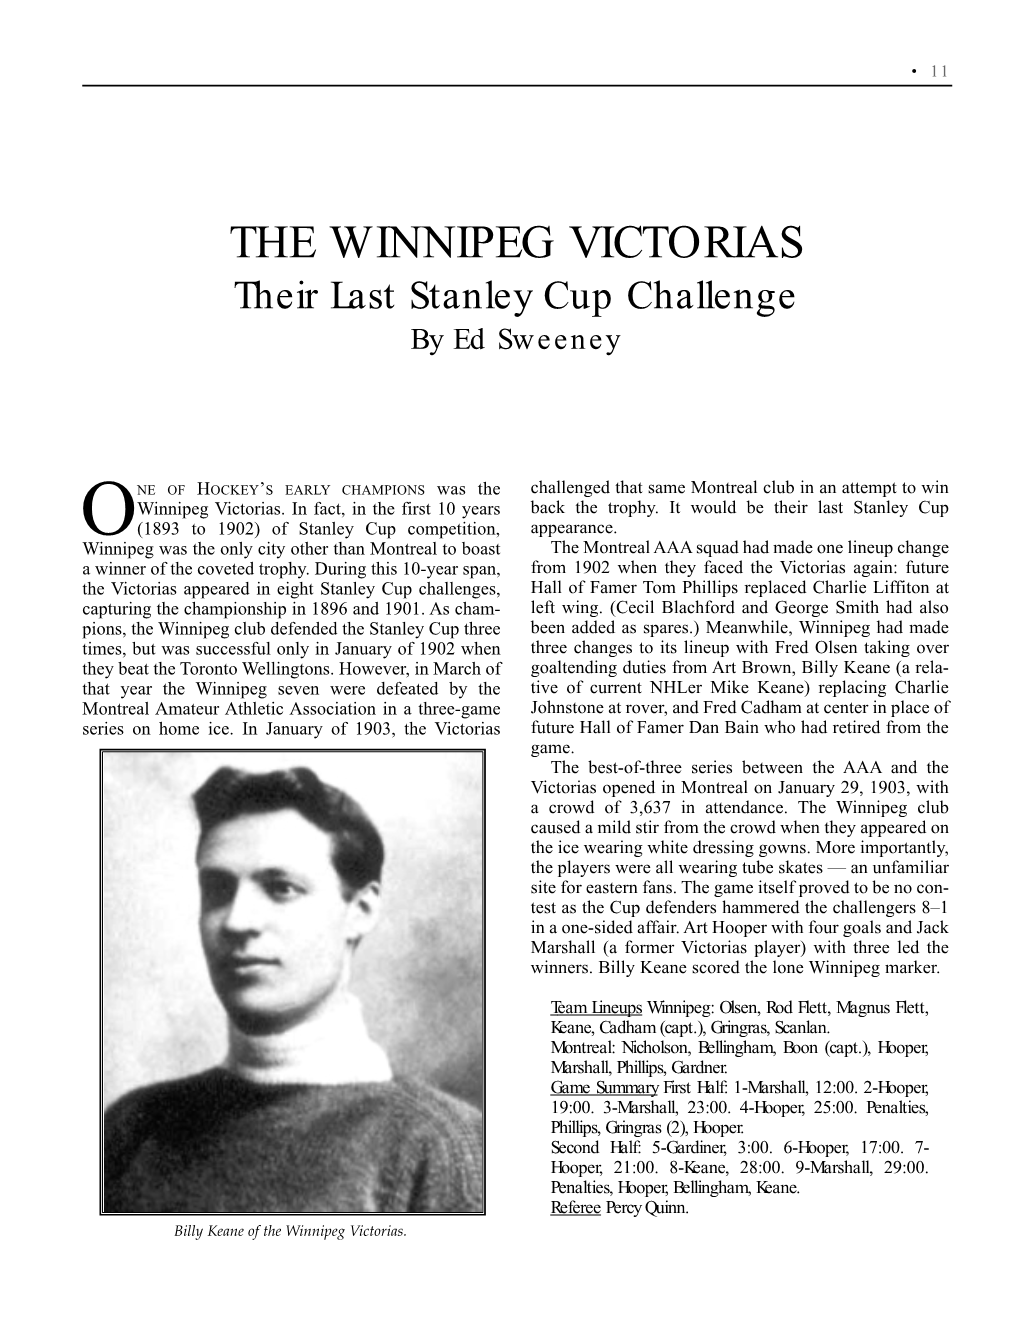 THE WINNIPEG VICTORIAS Their Last Stanley Cup Challenge by Ed Sweeney